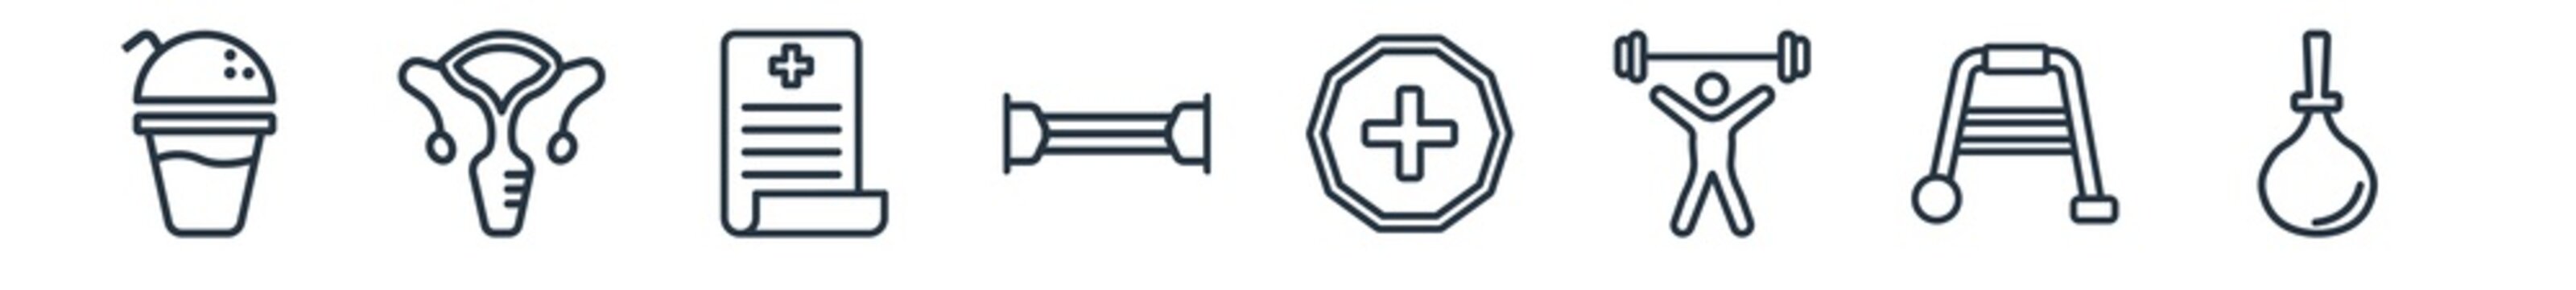 linear set of health and medical outline icons. line vector icons such as juice, gynecology, medical result, chest expander, medical, enema vector illustration.